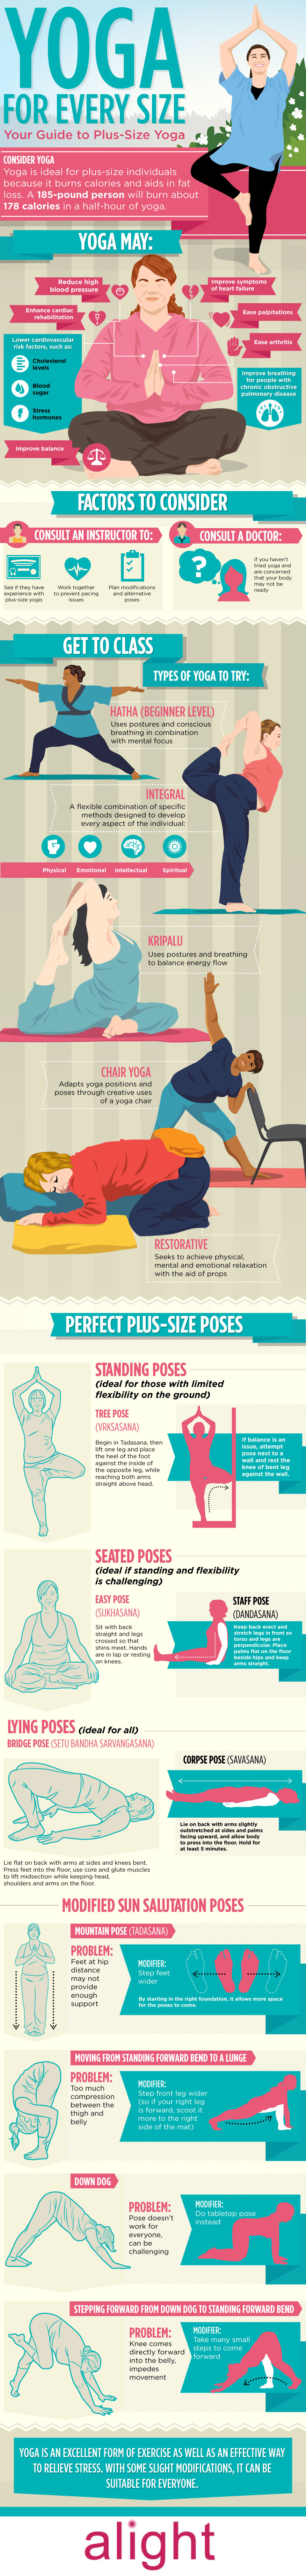 Yoga for Every Size: Your Guide to Plus Size Yoga